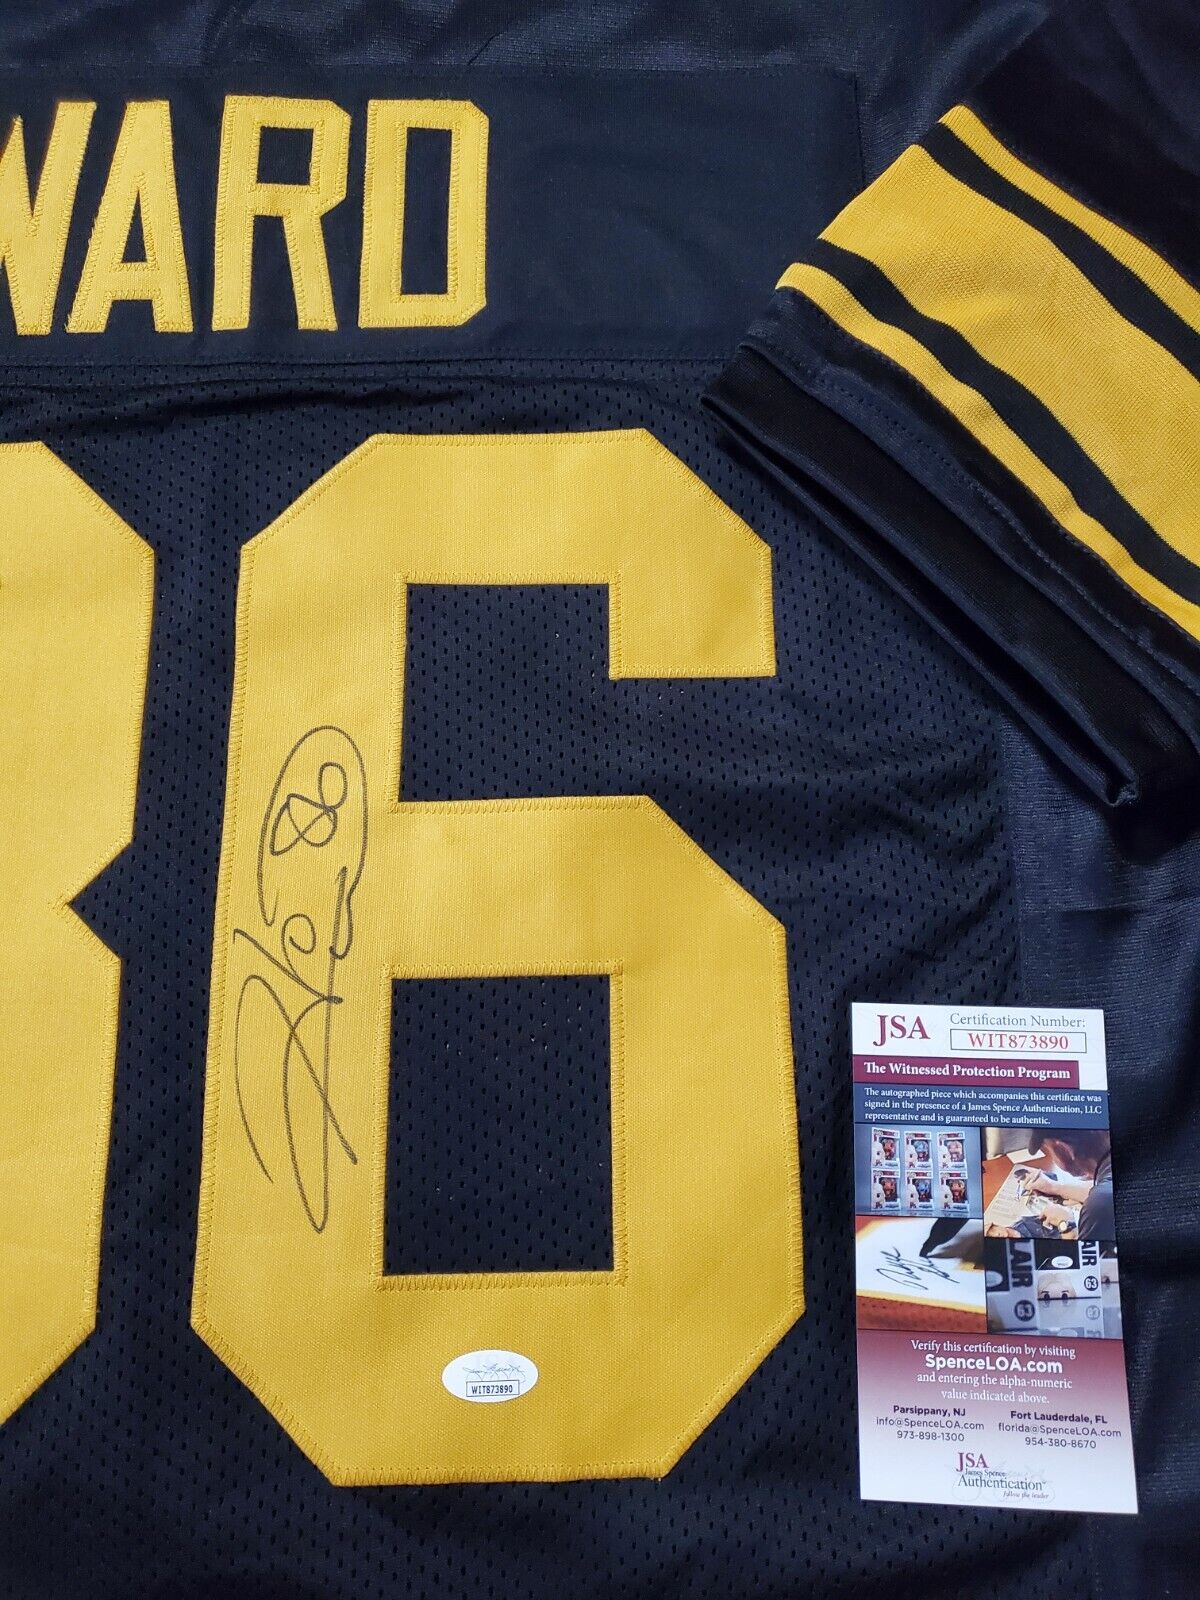 Pittsburgh Steelers Hines Ward Autographed Signed Jersey Jsa  Coa